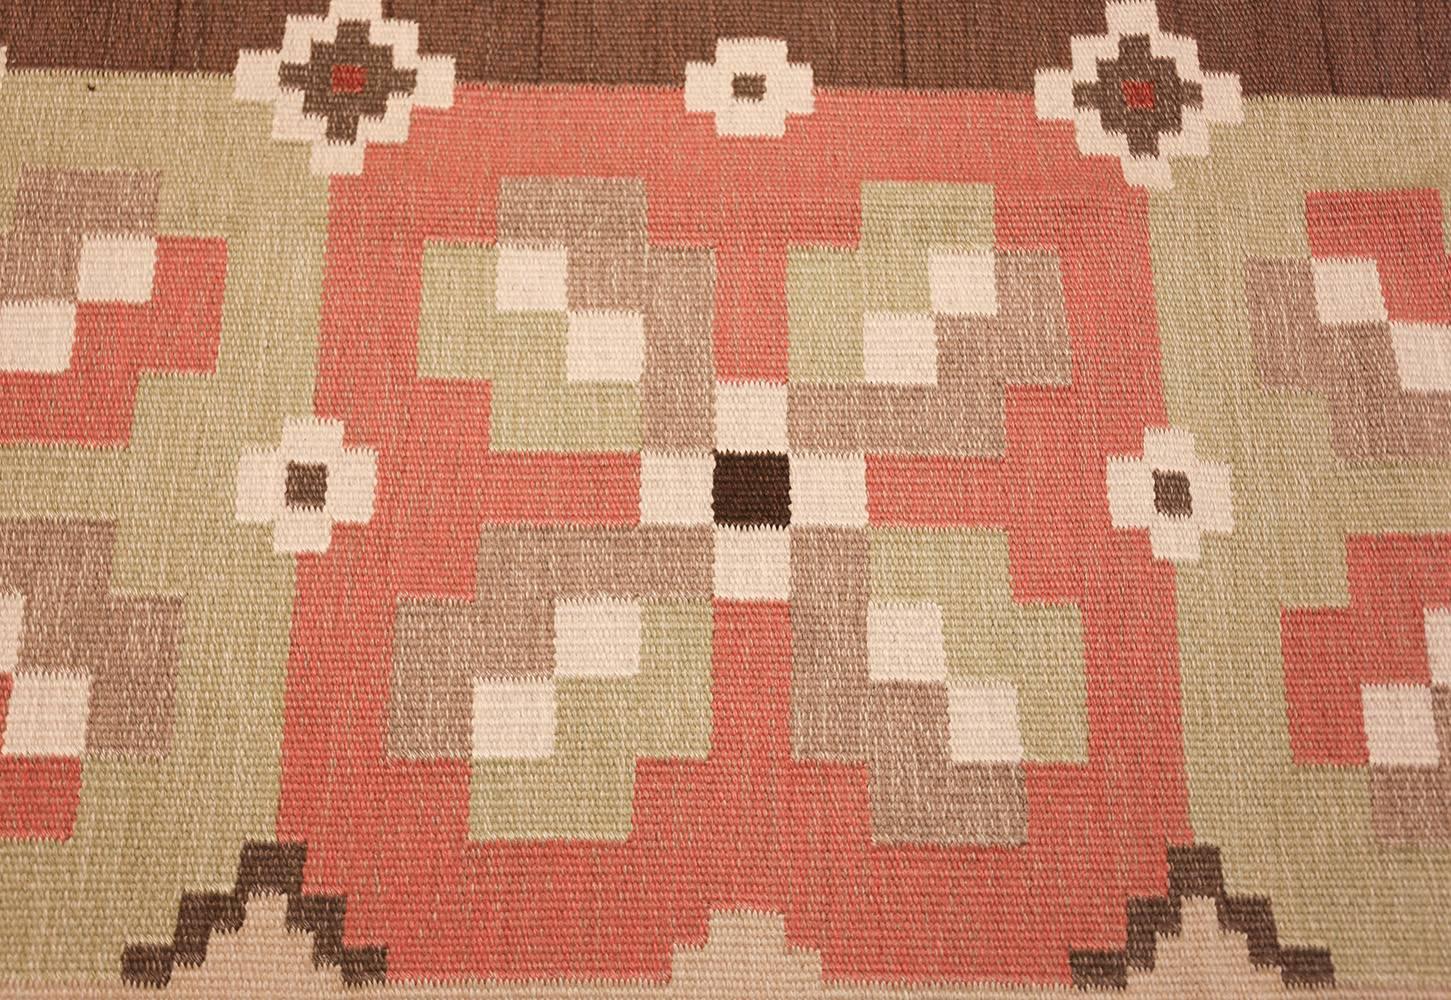 Wool Vintage Swedish Kilim. Size: 9 ft 9 in x 13 ft 4 in (2.97 m x 4.06 m)